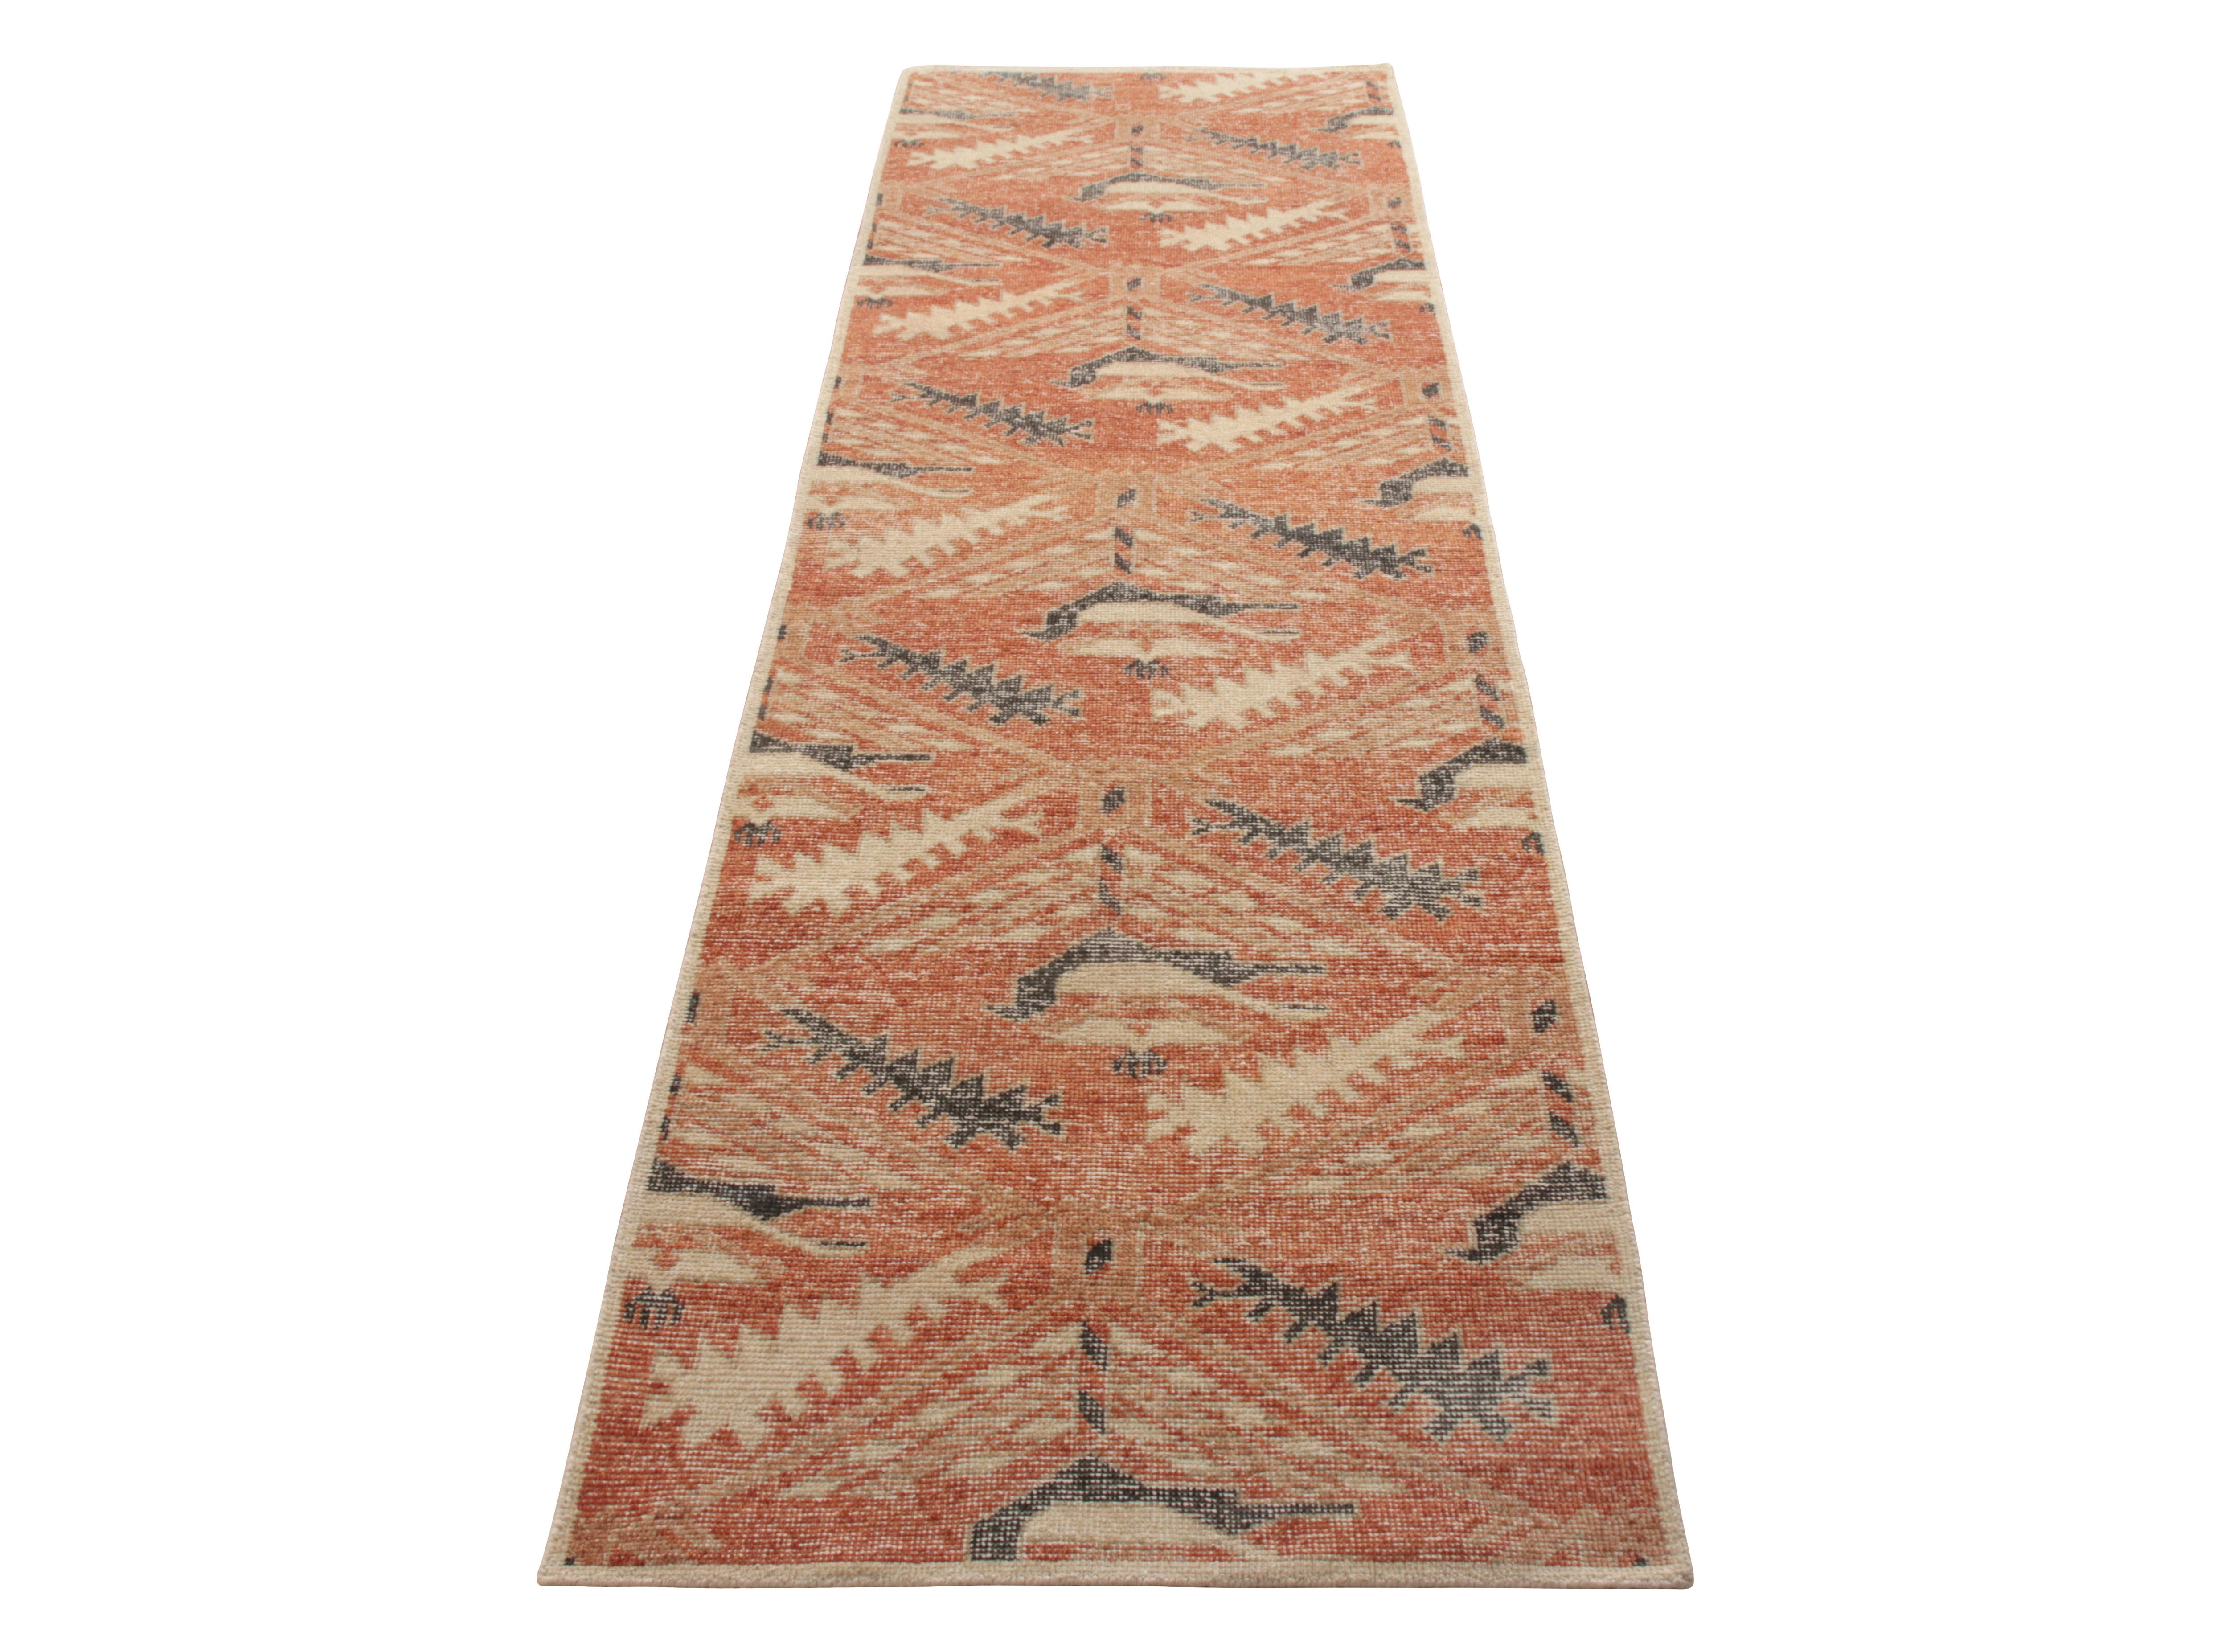 Hand knotted in low-sheared wool, a welcoming 3×10 runner available in Rug & Kilim’s Homage Collection. This piece emanates a shabby chic vibe as it combines a distressed, textural take on traditional geometric pattern with bold blue and red